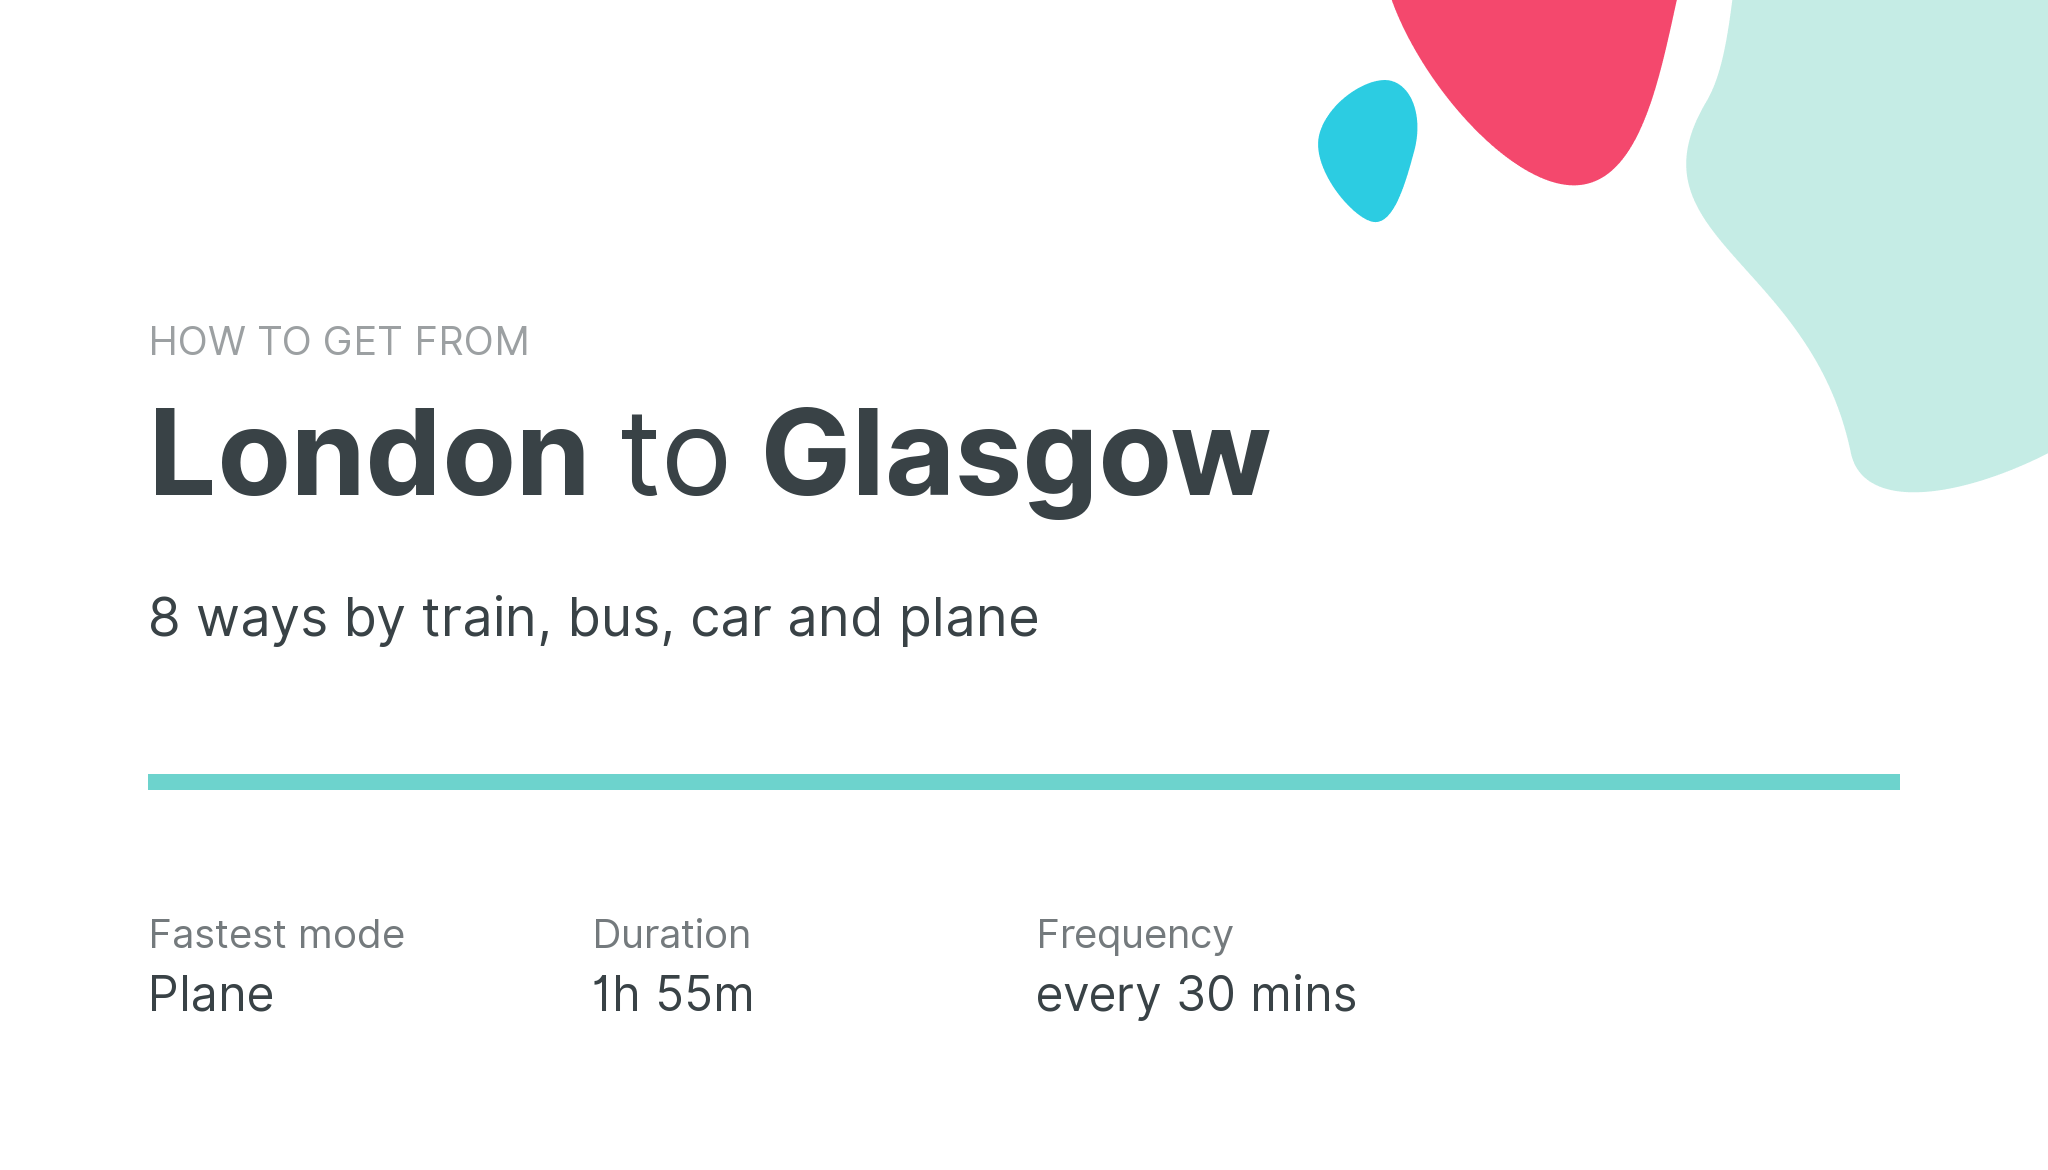 How do I get from London to Glasgow